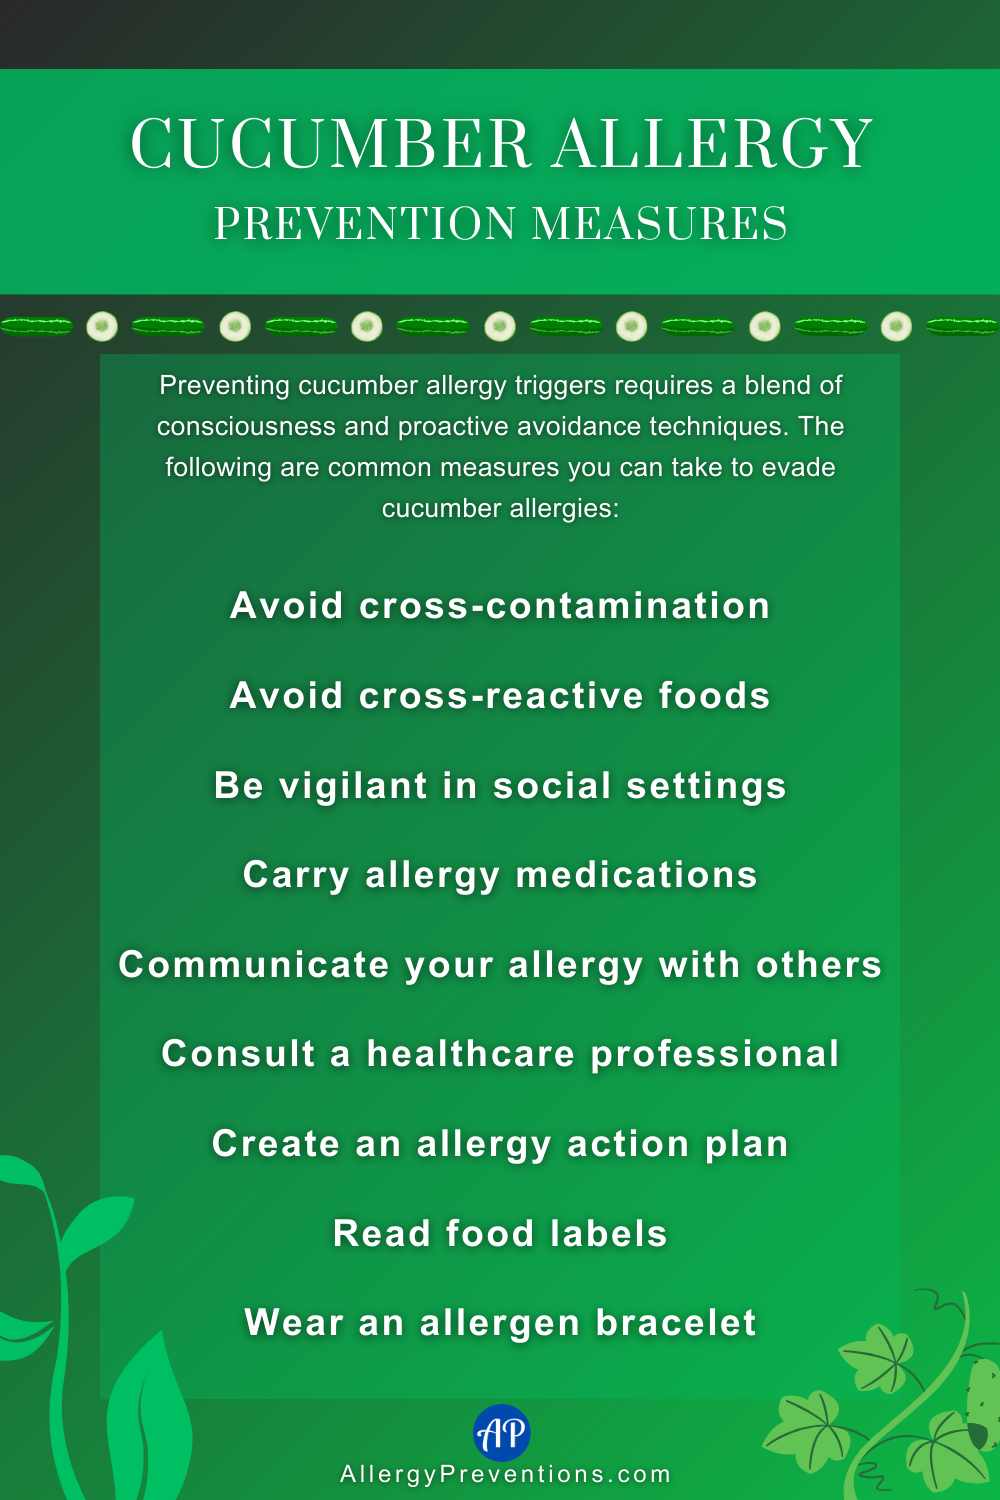 Cucumber Allergy Prevention Measures infographic. Preventing cucumber allergy triggers requires a blend of consciousness and proactive avoidance techniques. The following are common measures you can take to evade cucumber allergies: Avoid cross-contamination, Avoid cross-reactive foods, Be vigilant in social settings, Carry allergy medications, Communicate your allergy with others, Consult a healthcare professional, Create an allergy action plan, Read food labels, Wear an allergen bracelet.